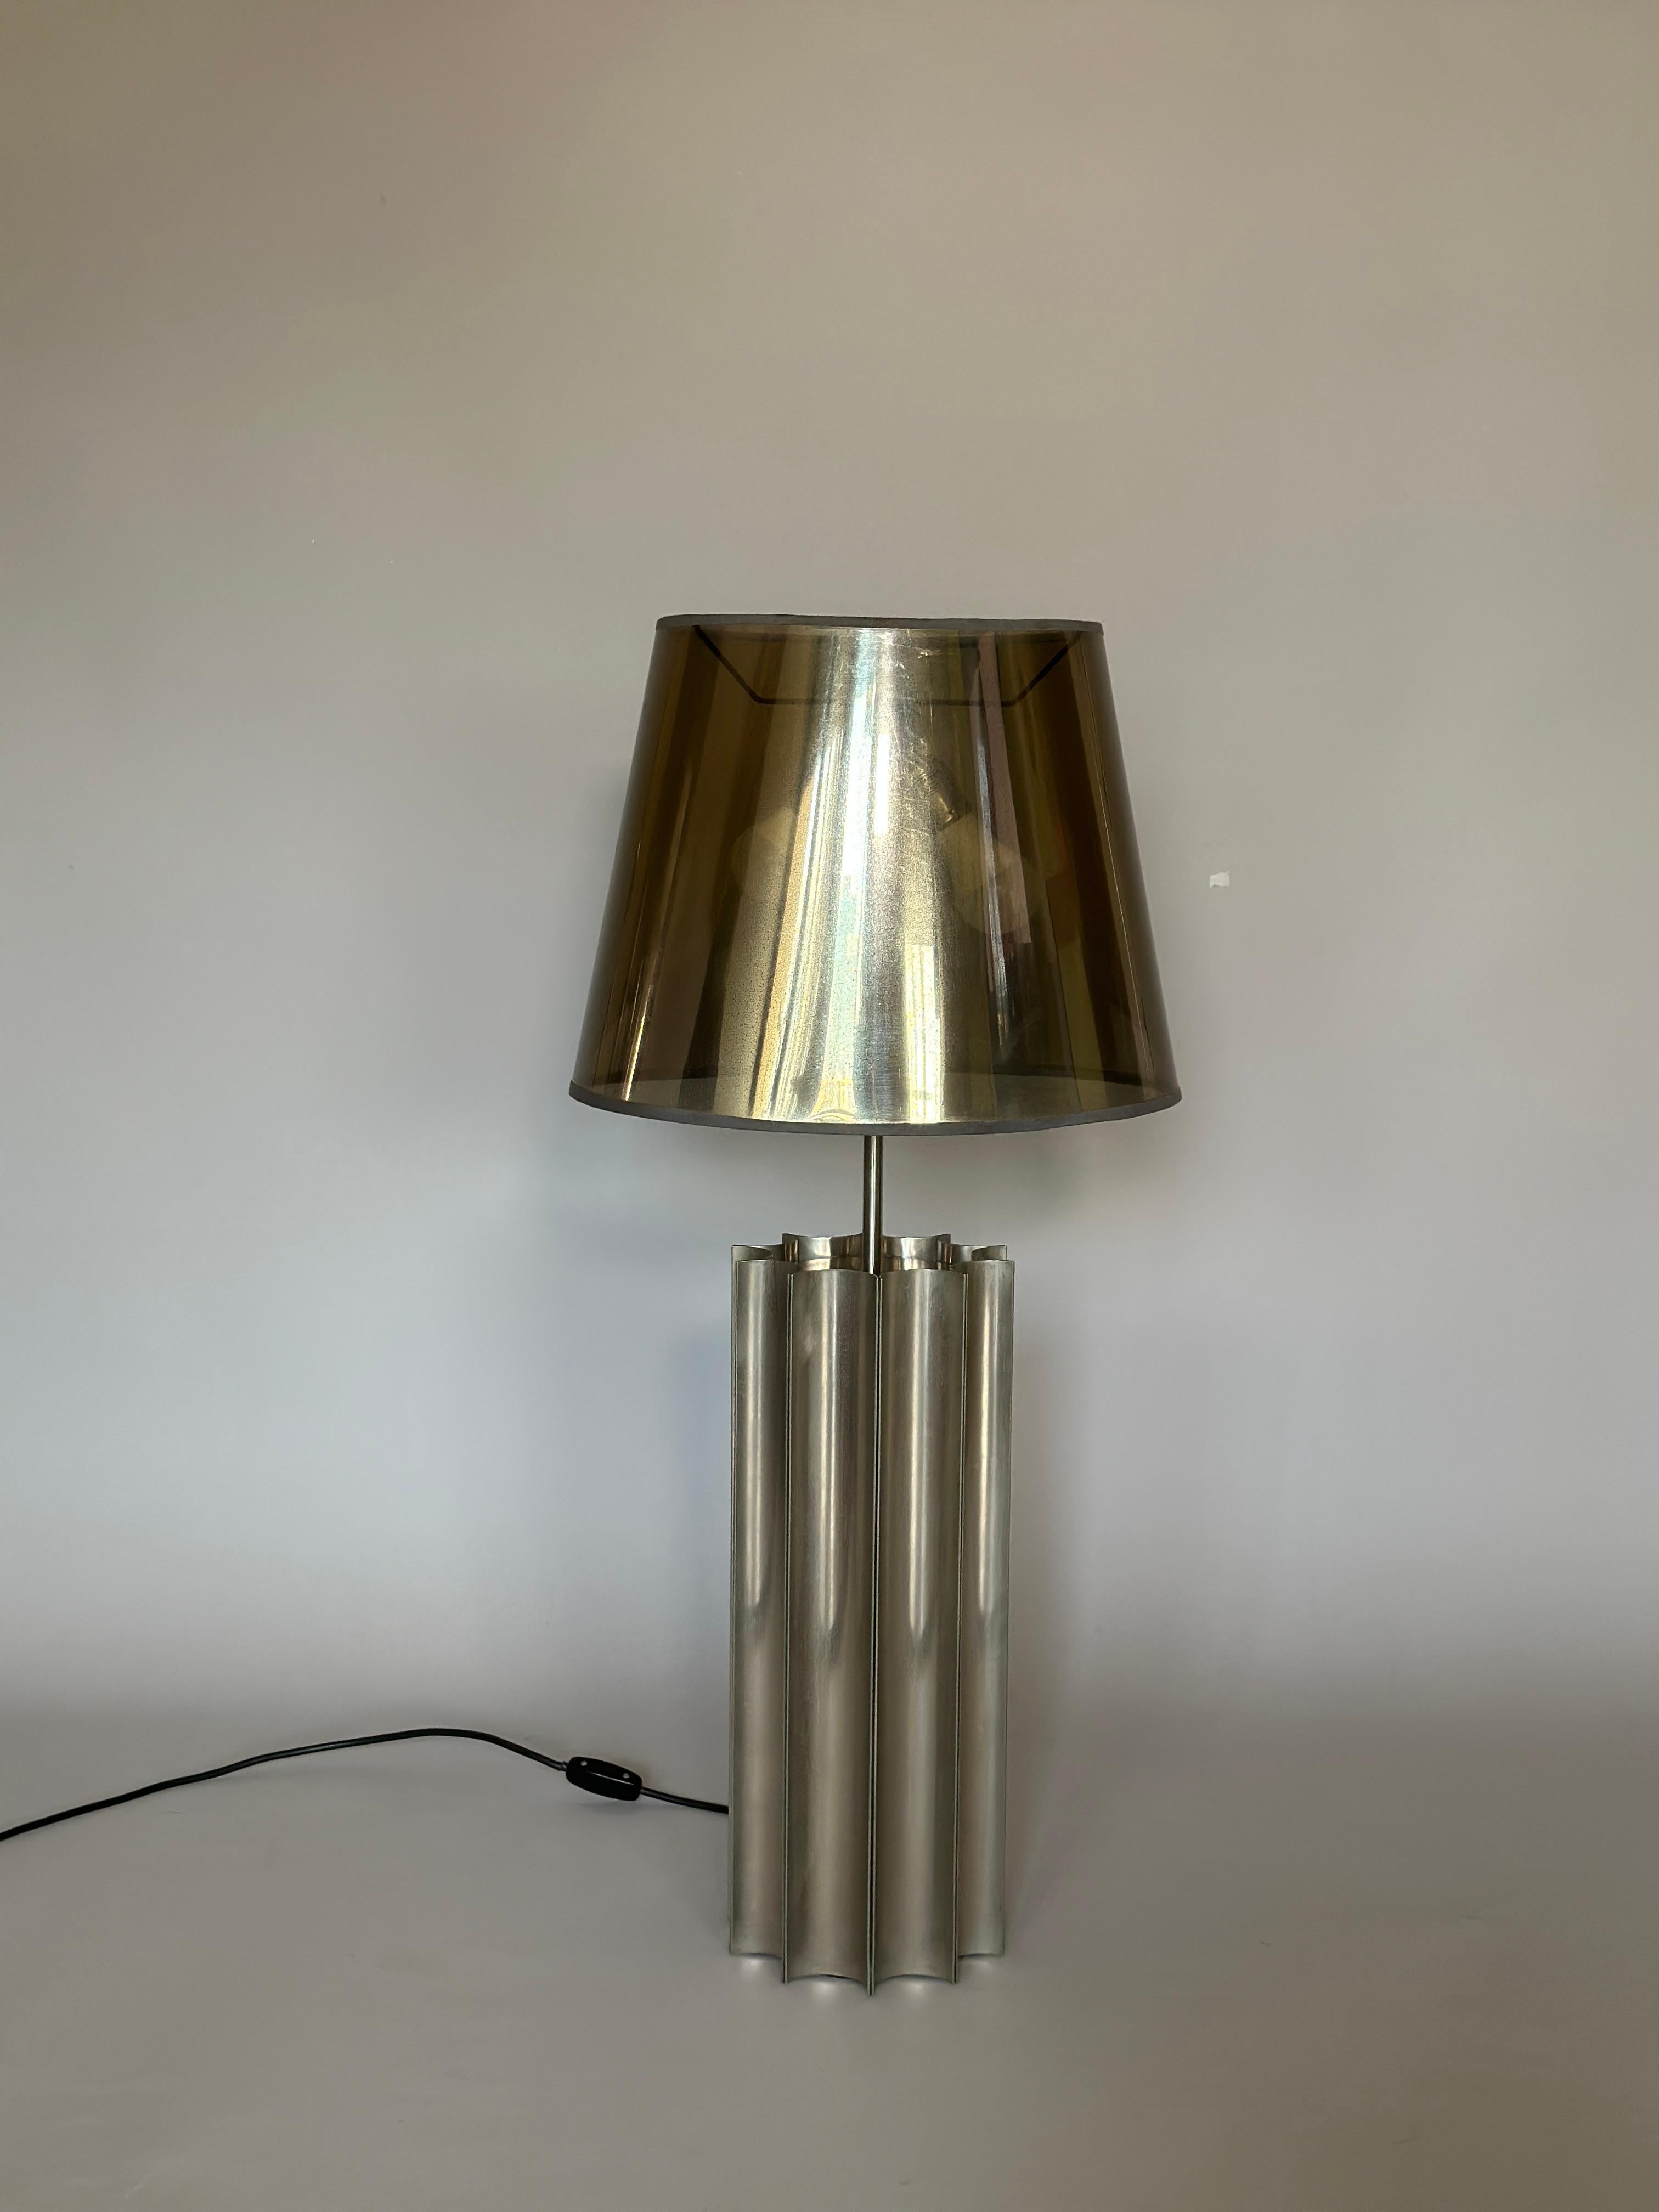 Ingo Maurer table lamp 1960s. Made in Germany, base made chromed metal and plastic shade.